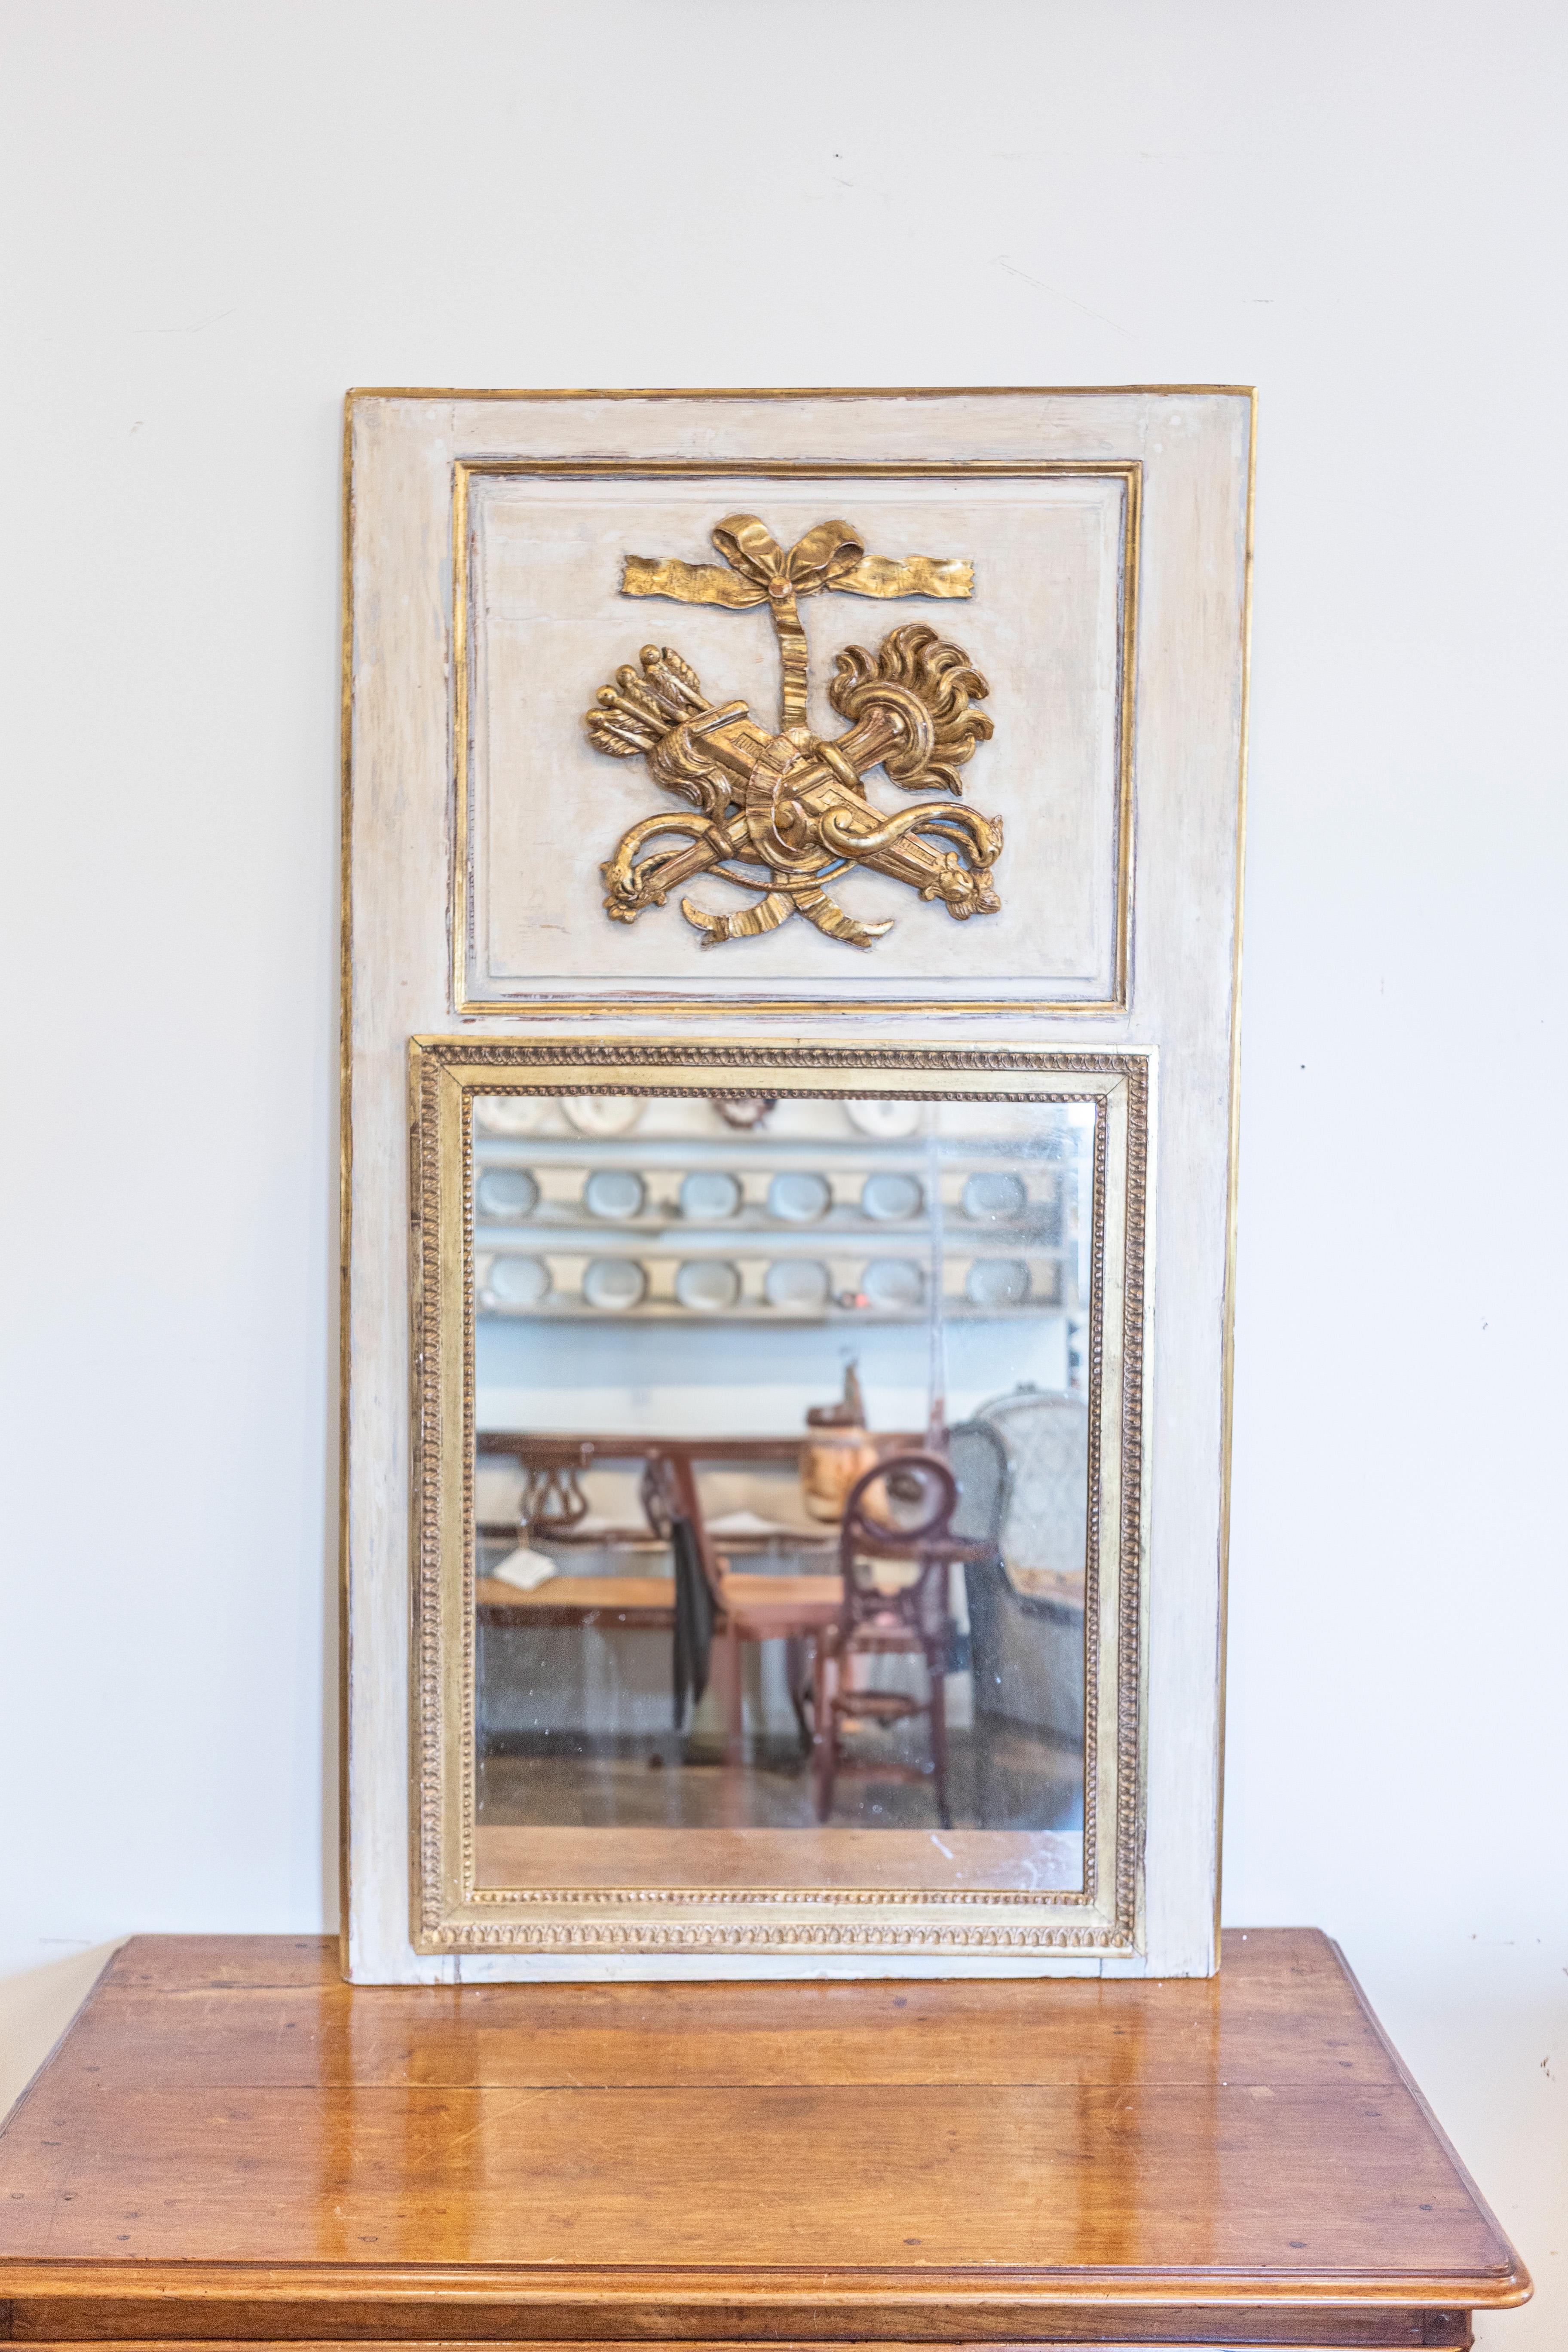 A French Louis XVI period gray painted and gilded trumeau mirror from circa 1790 with carved torch and quiver motif. This exquisite French Louis XVI period trumeau mirror, dating back to circa 1790, is a masterpiece of classic design and romantic